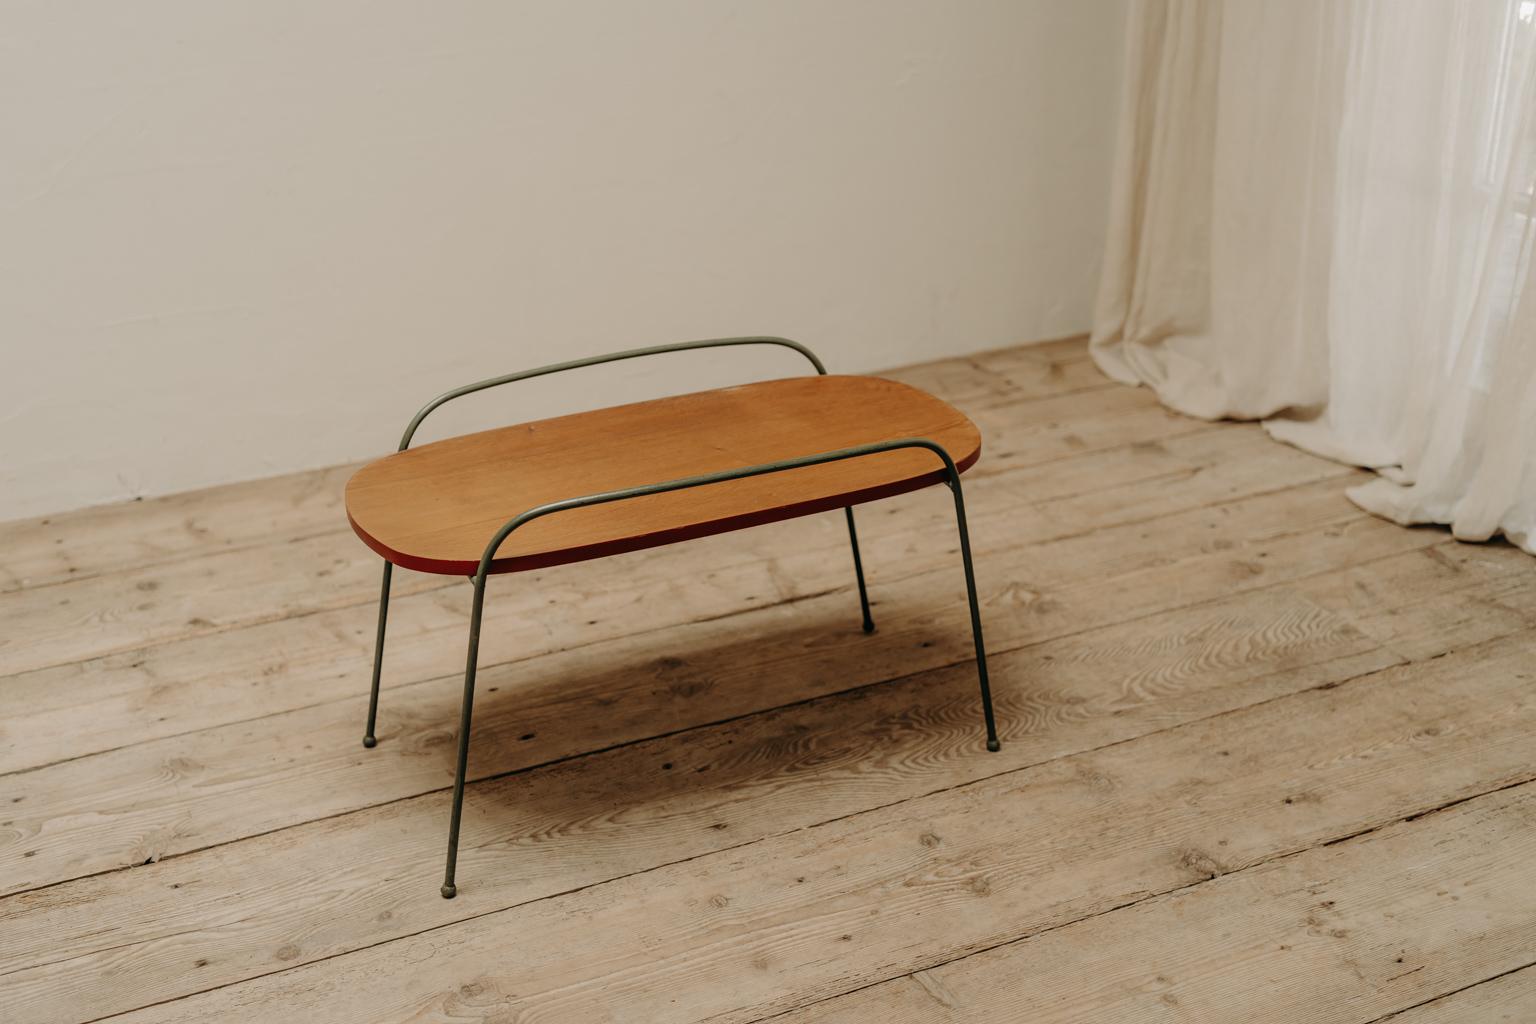 Great midcentury design on this elegant, small coffee table... Great item for vintage lovers.